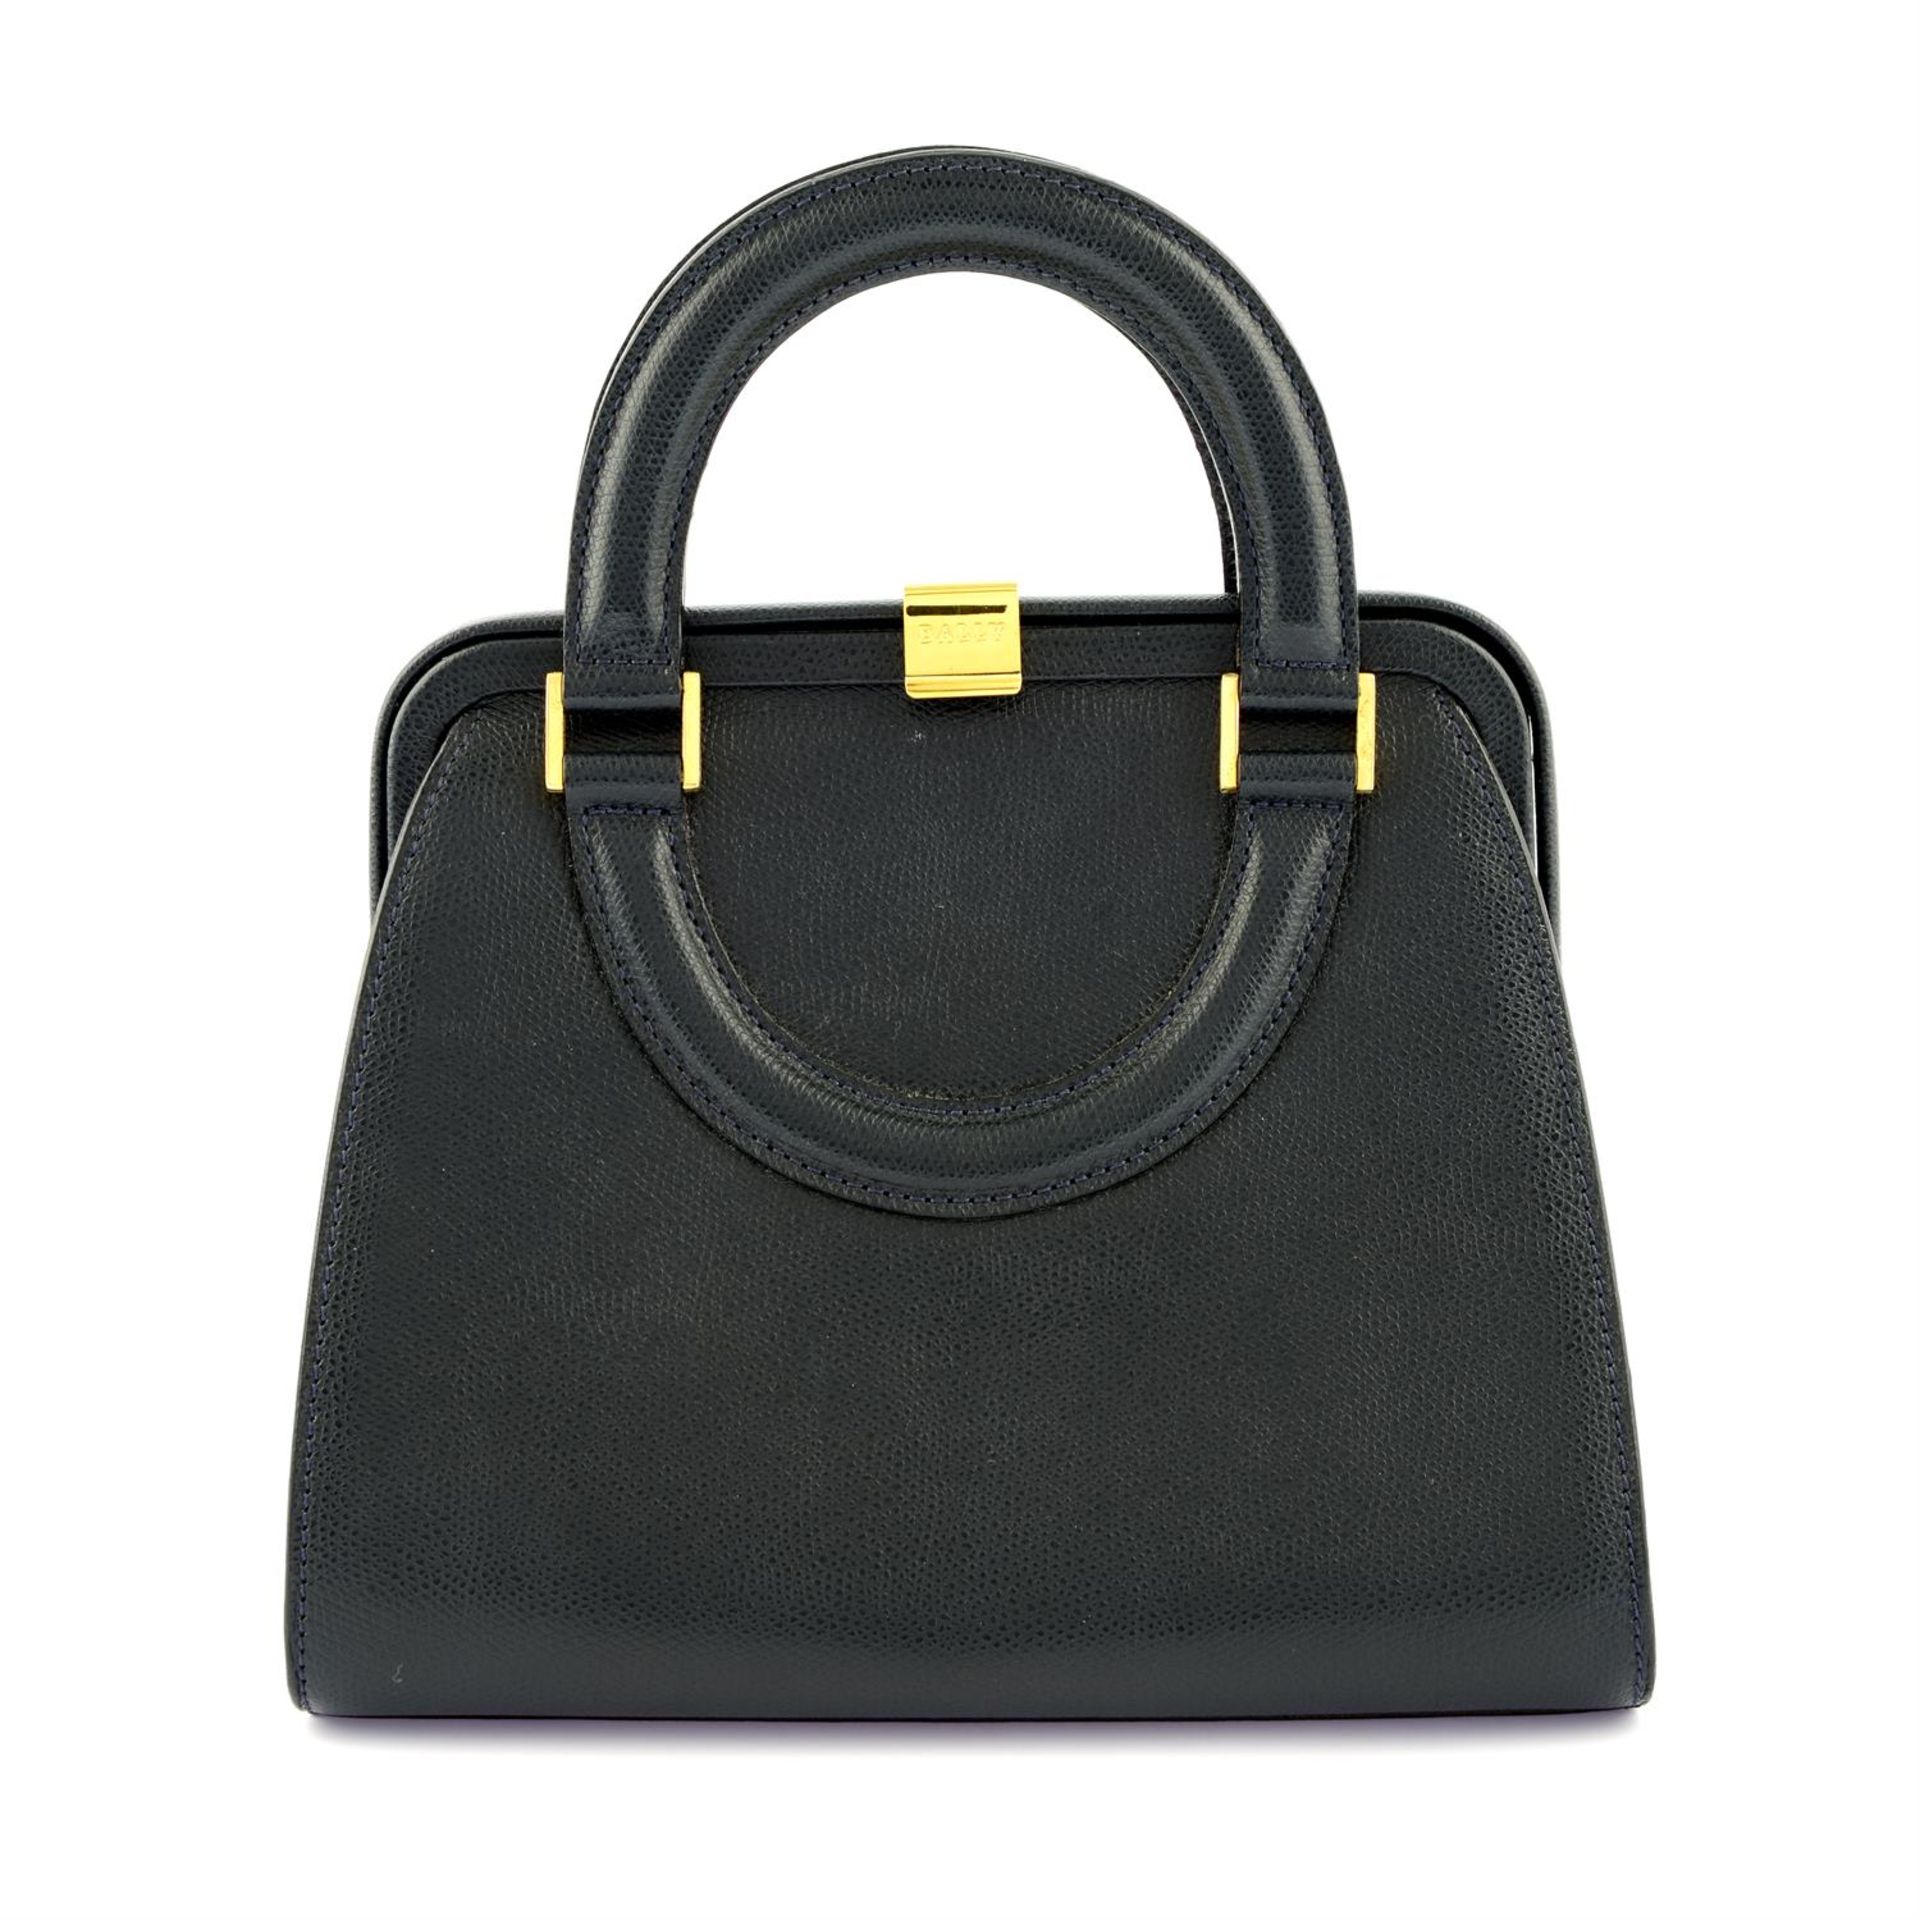 BALLY - a navy leather top handle bag.